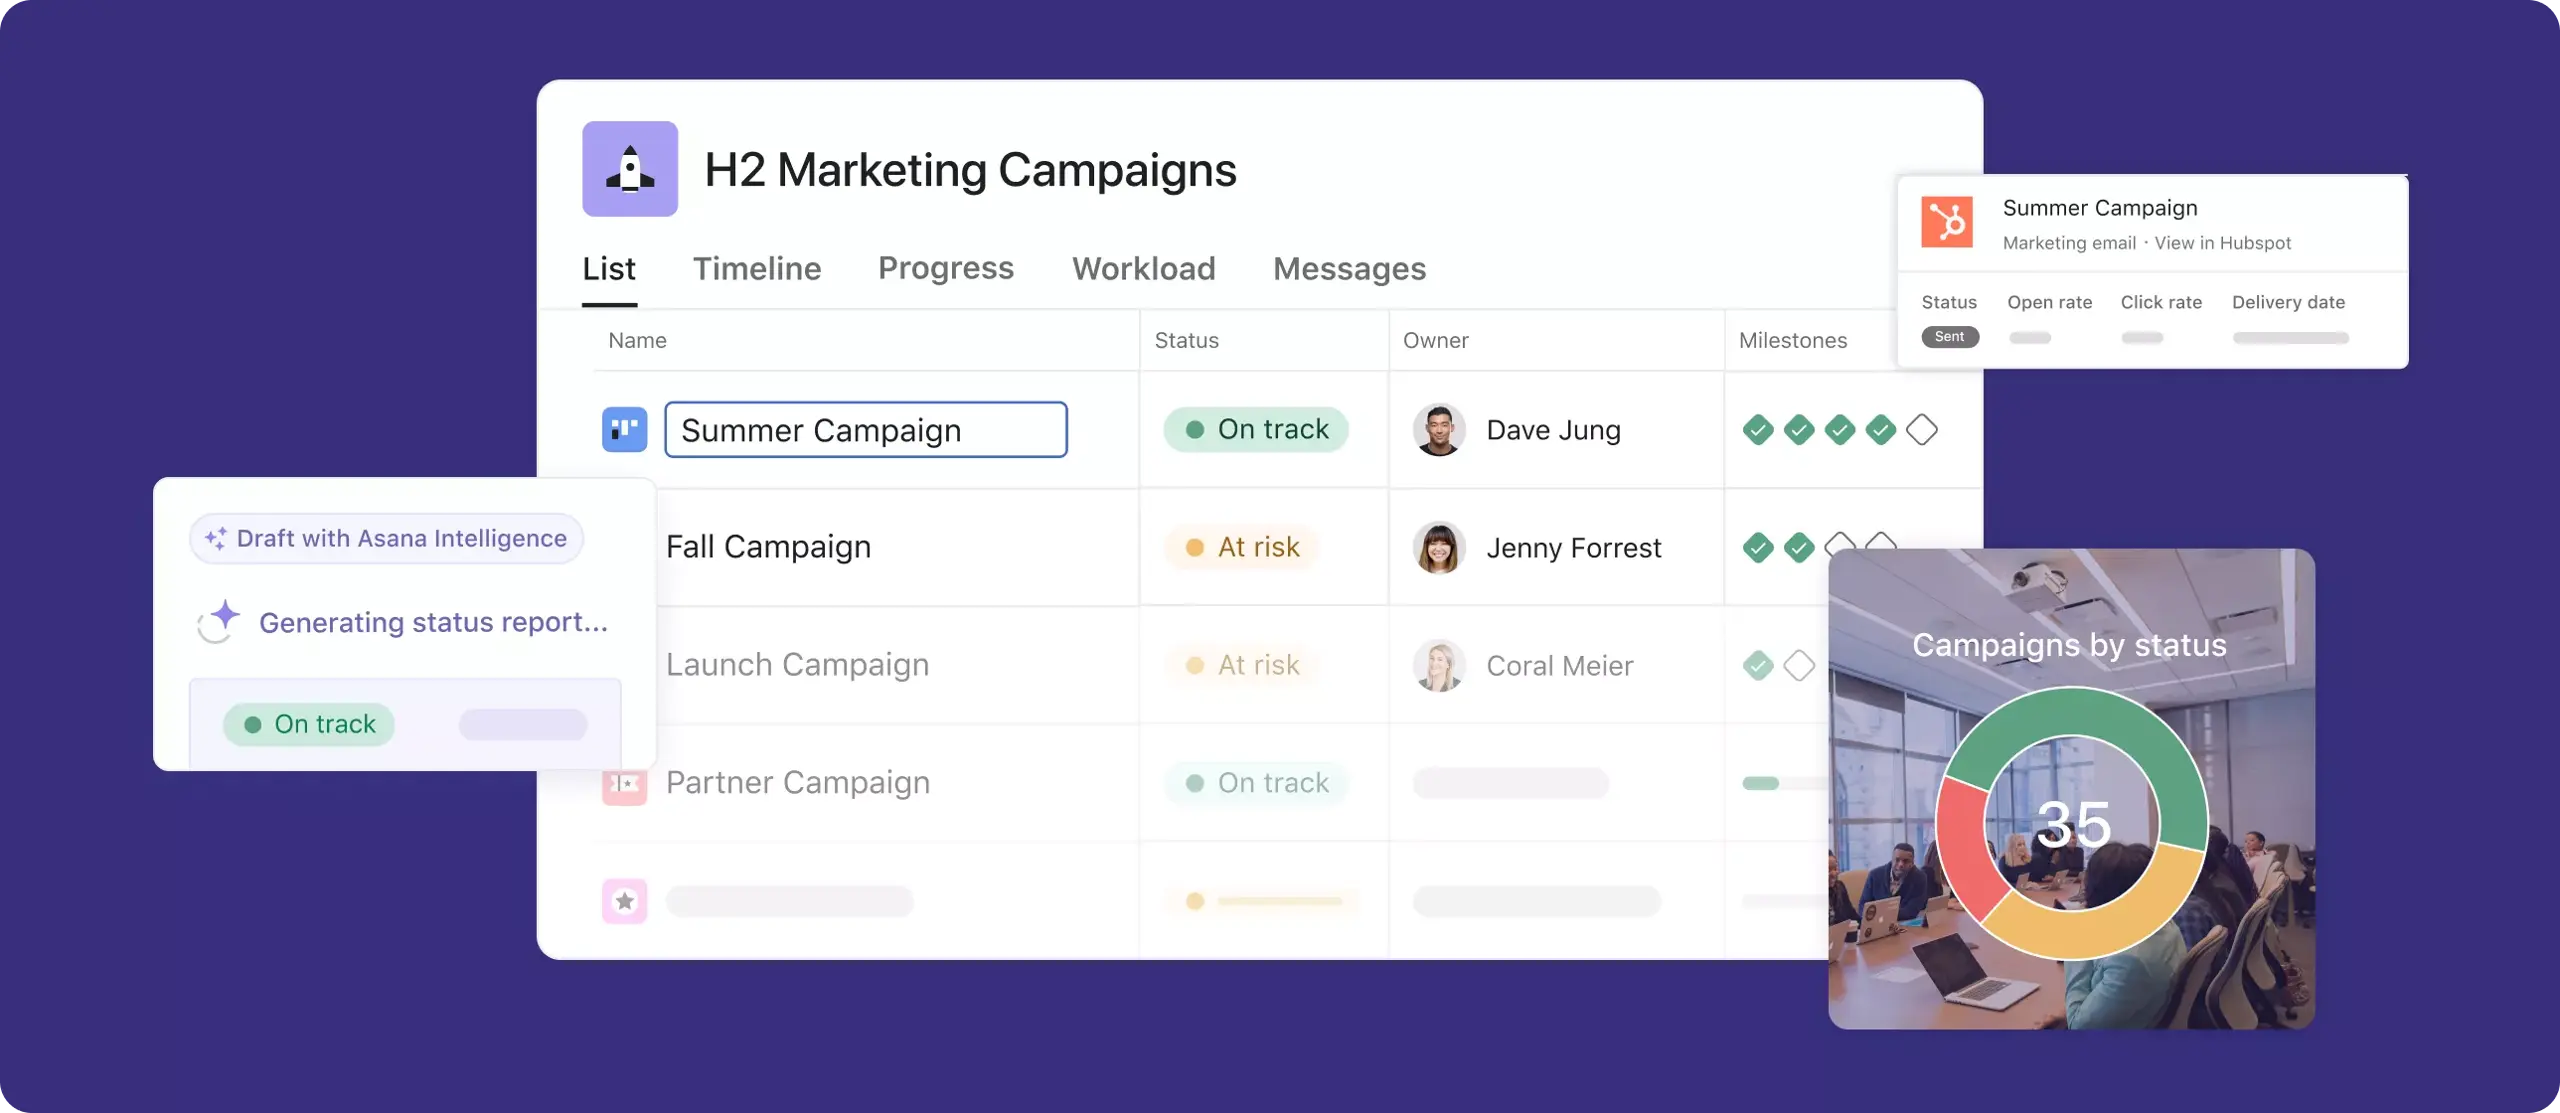 Hero image for Campaign Management of Marketing Campaigns in an Asana Product UI 